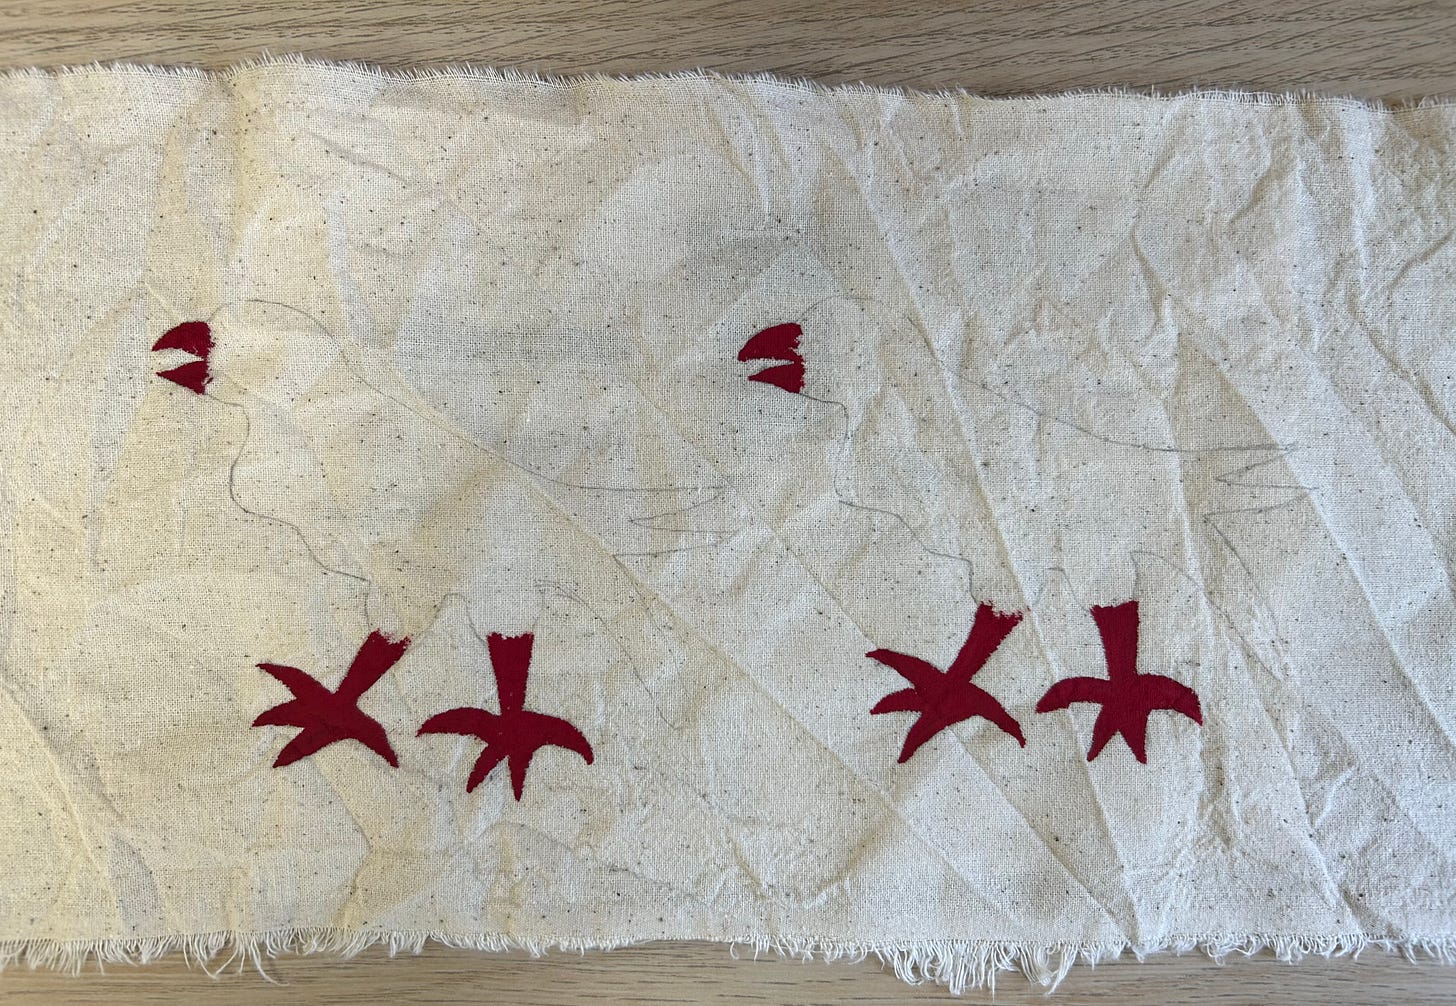 Pencil and red paint on cloth, in bird shapes